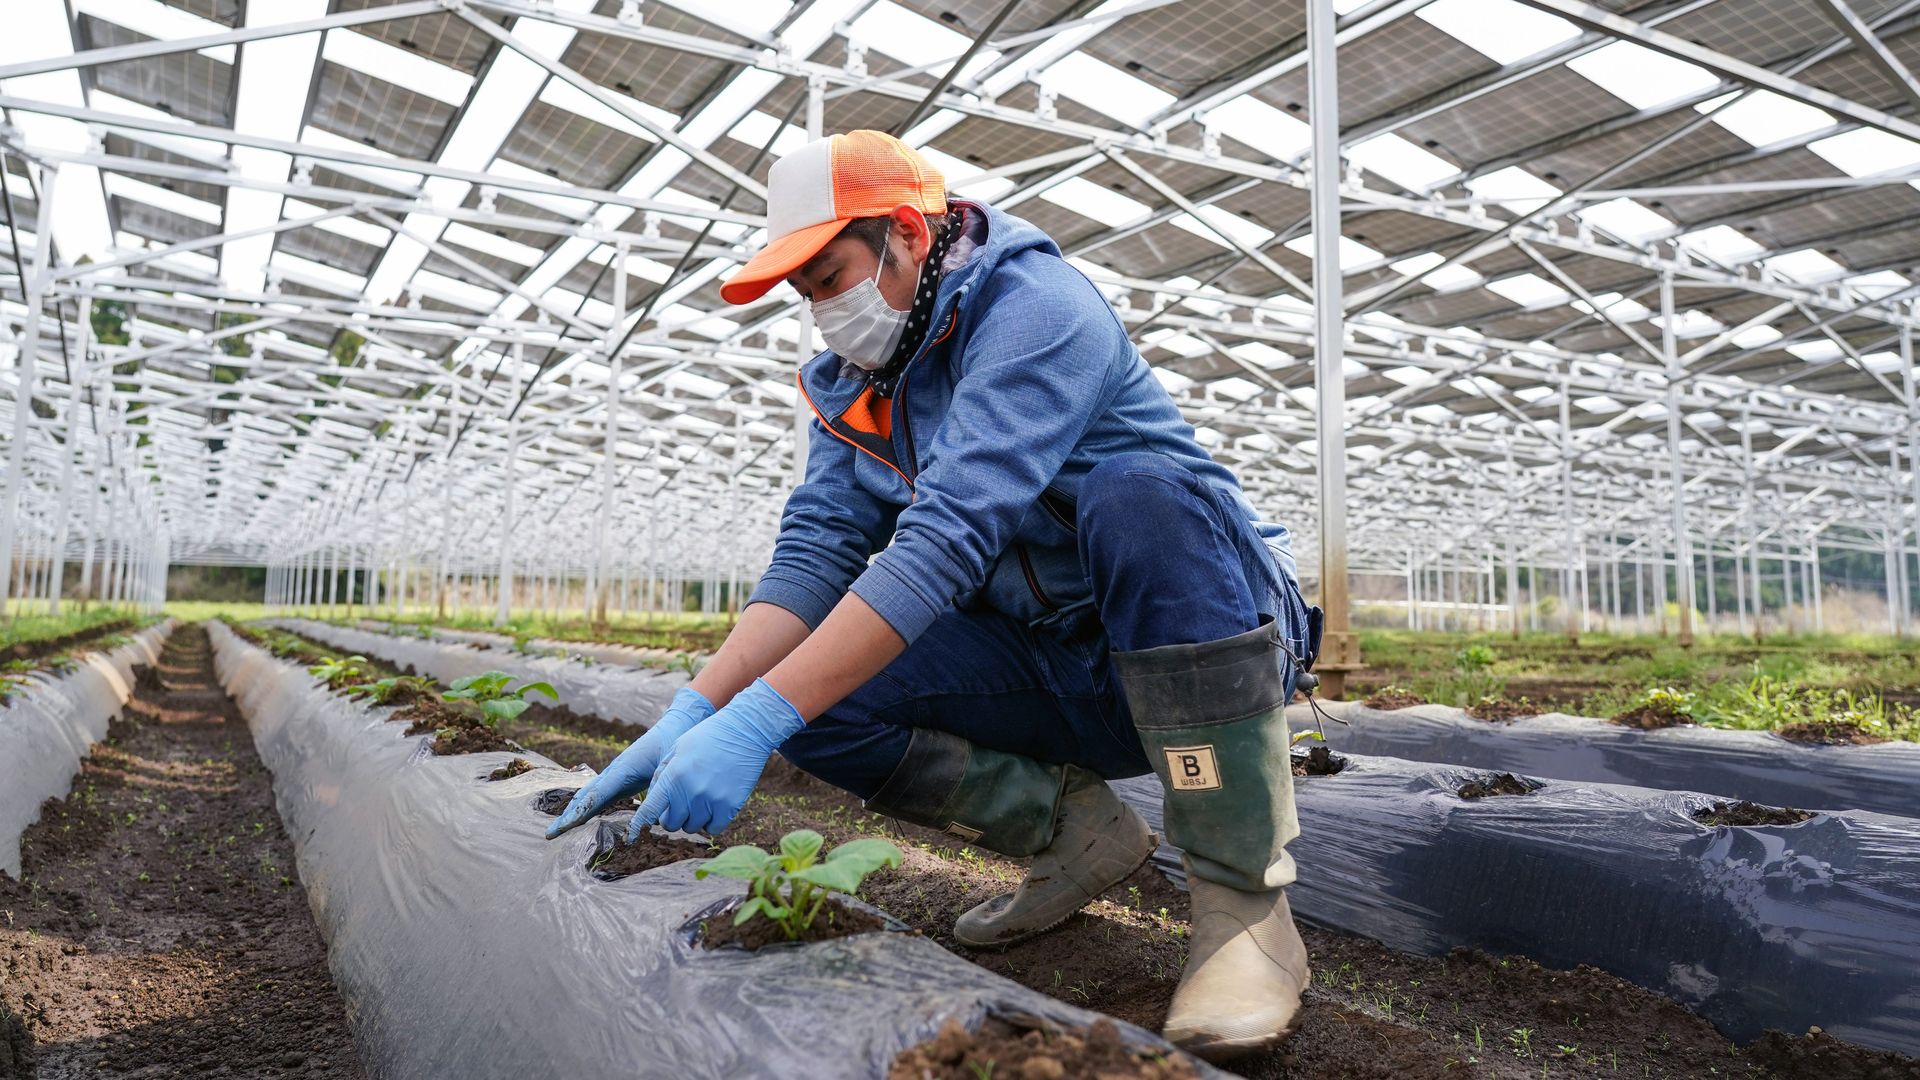 A worker at an agrivoltaic farm in Japan